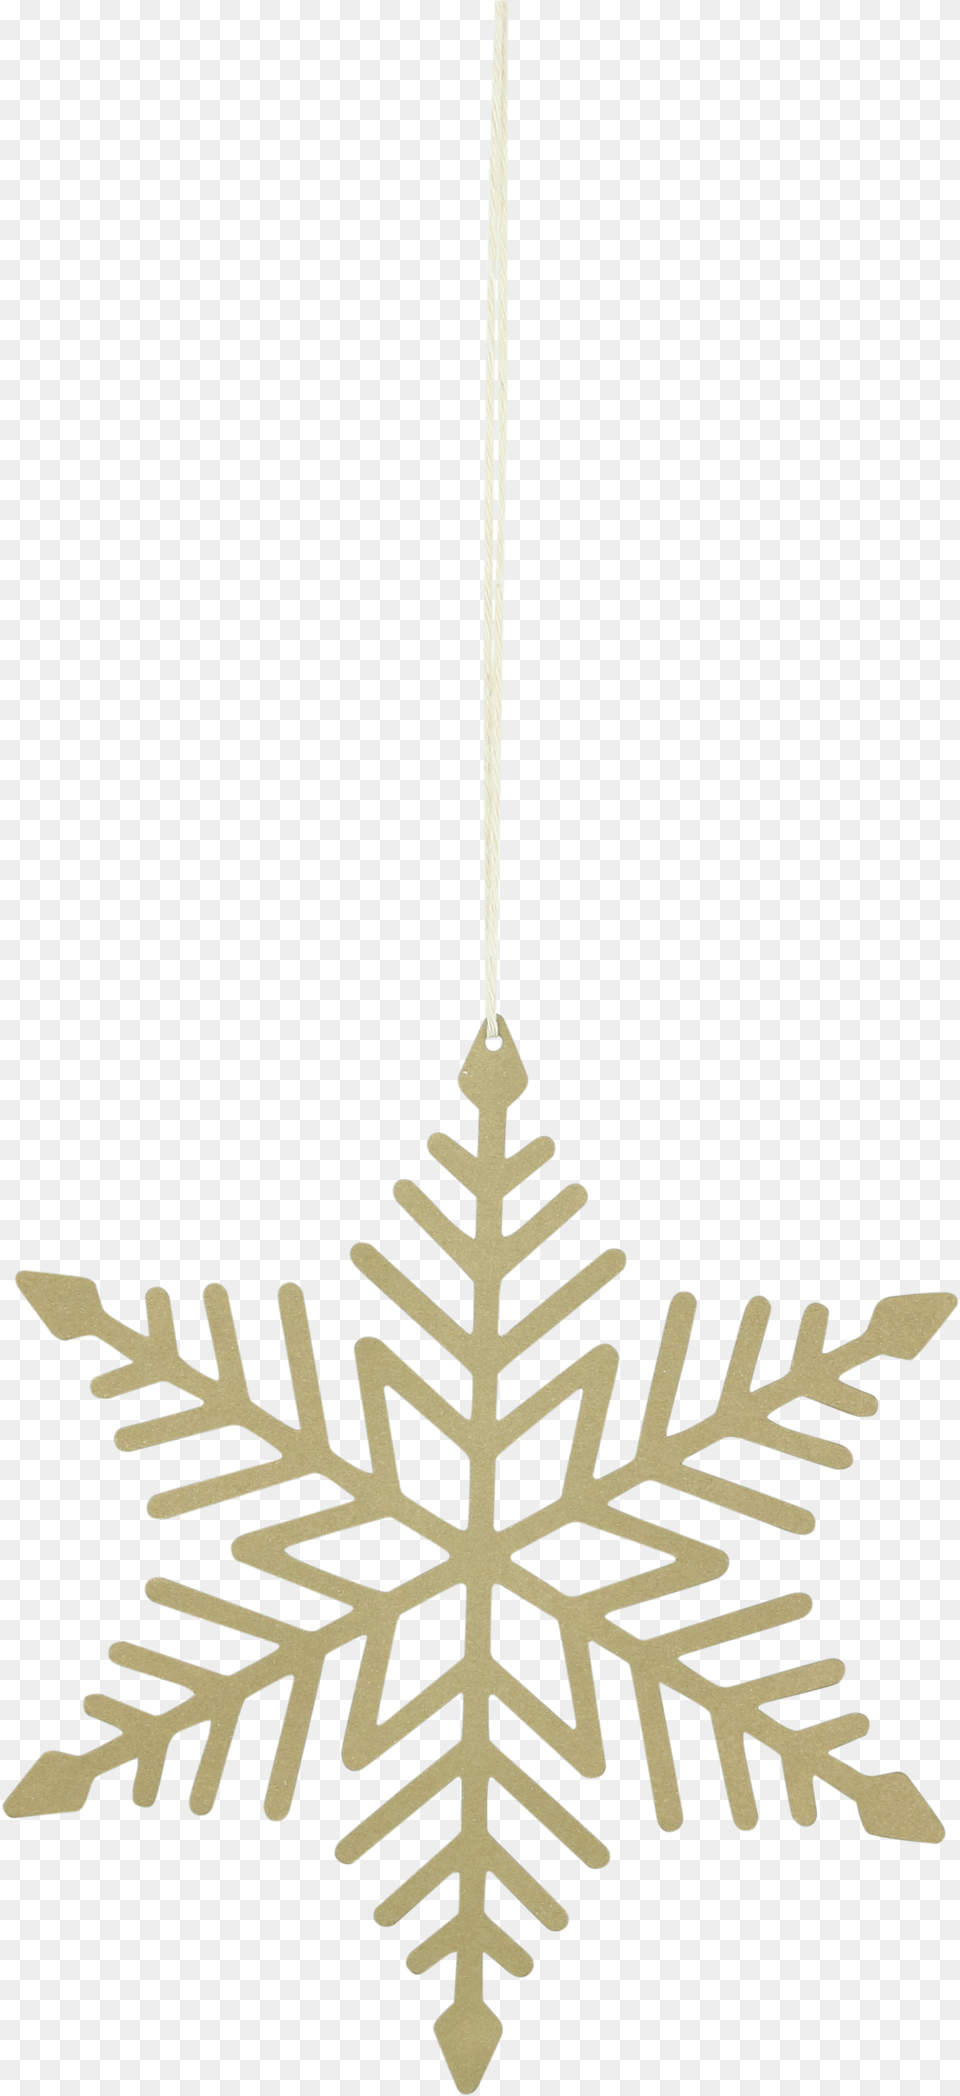 Traditional Christmas Snowflakes Snowflakes Black And White, Leaf, Plant, Nature, Outdoors Png Image